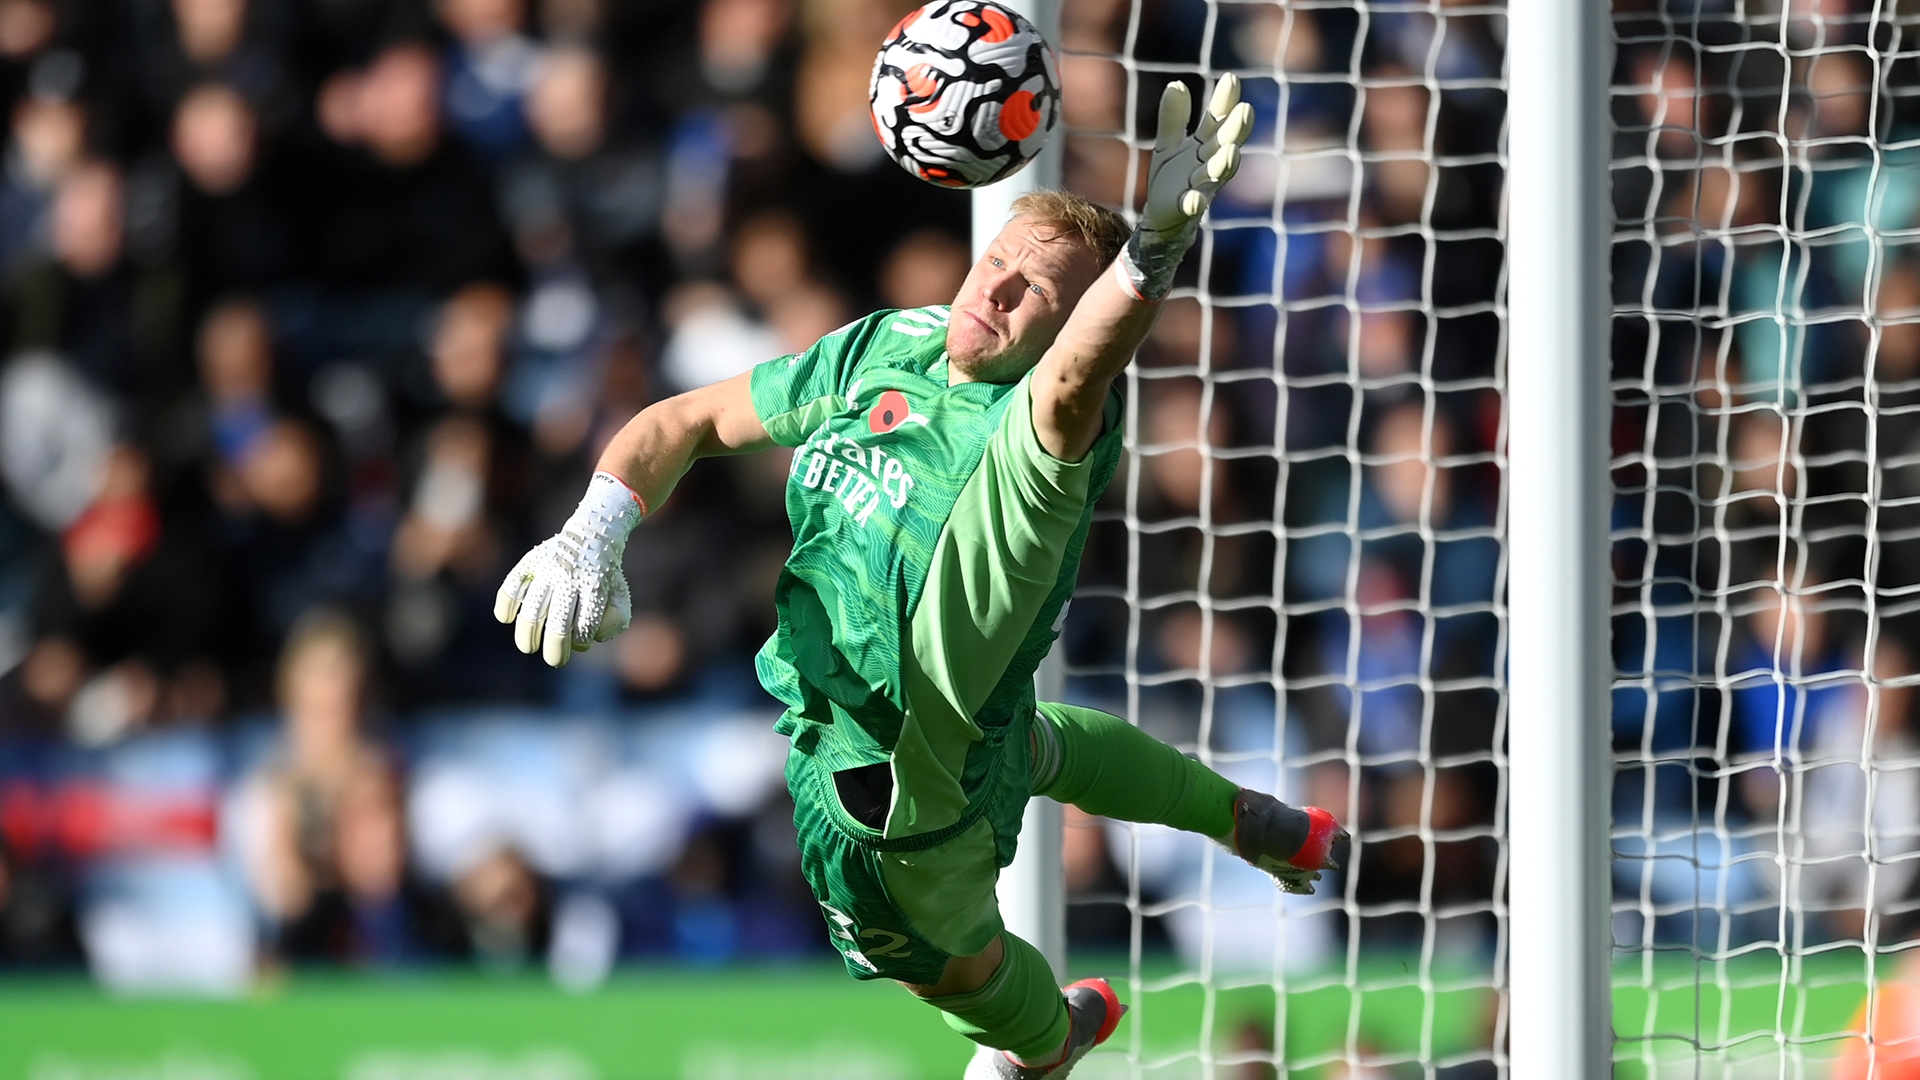 Best save I've seen in years!' heroics earn Arsenal record statement win at Leicester